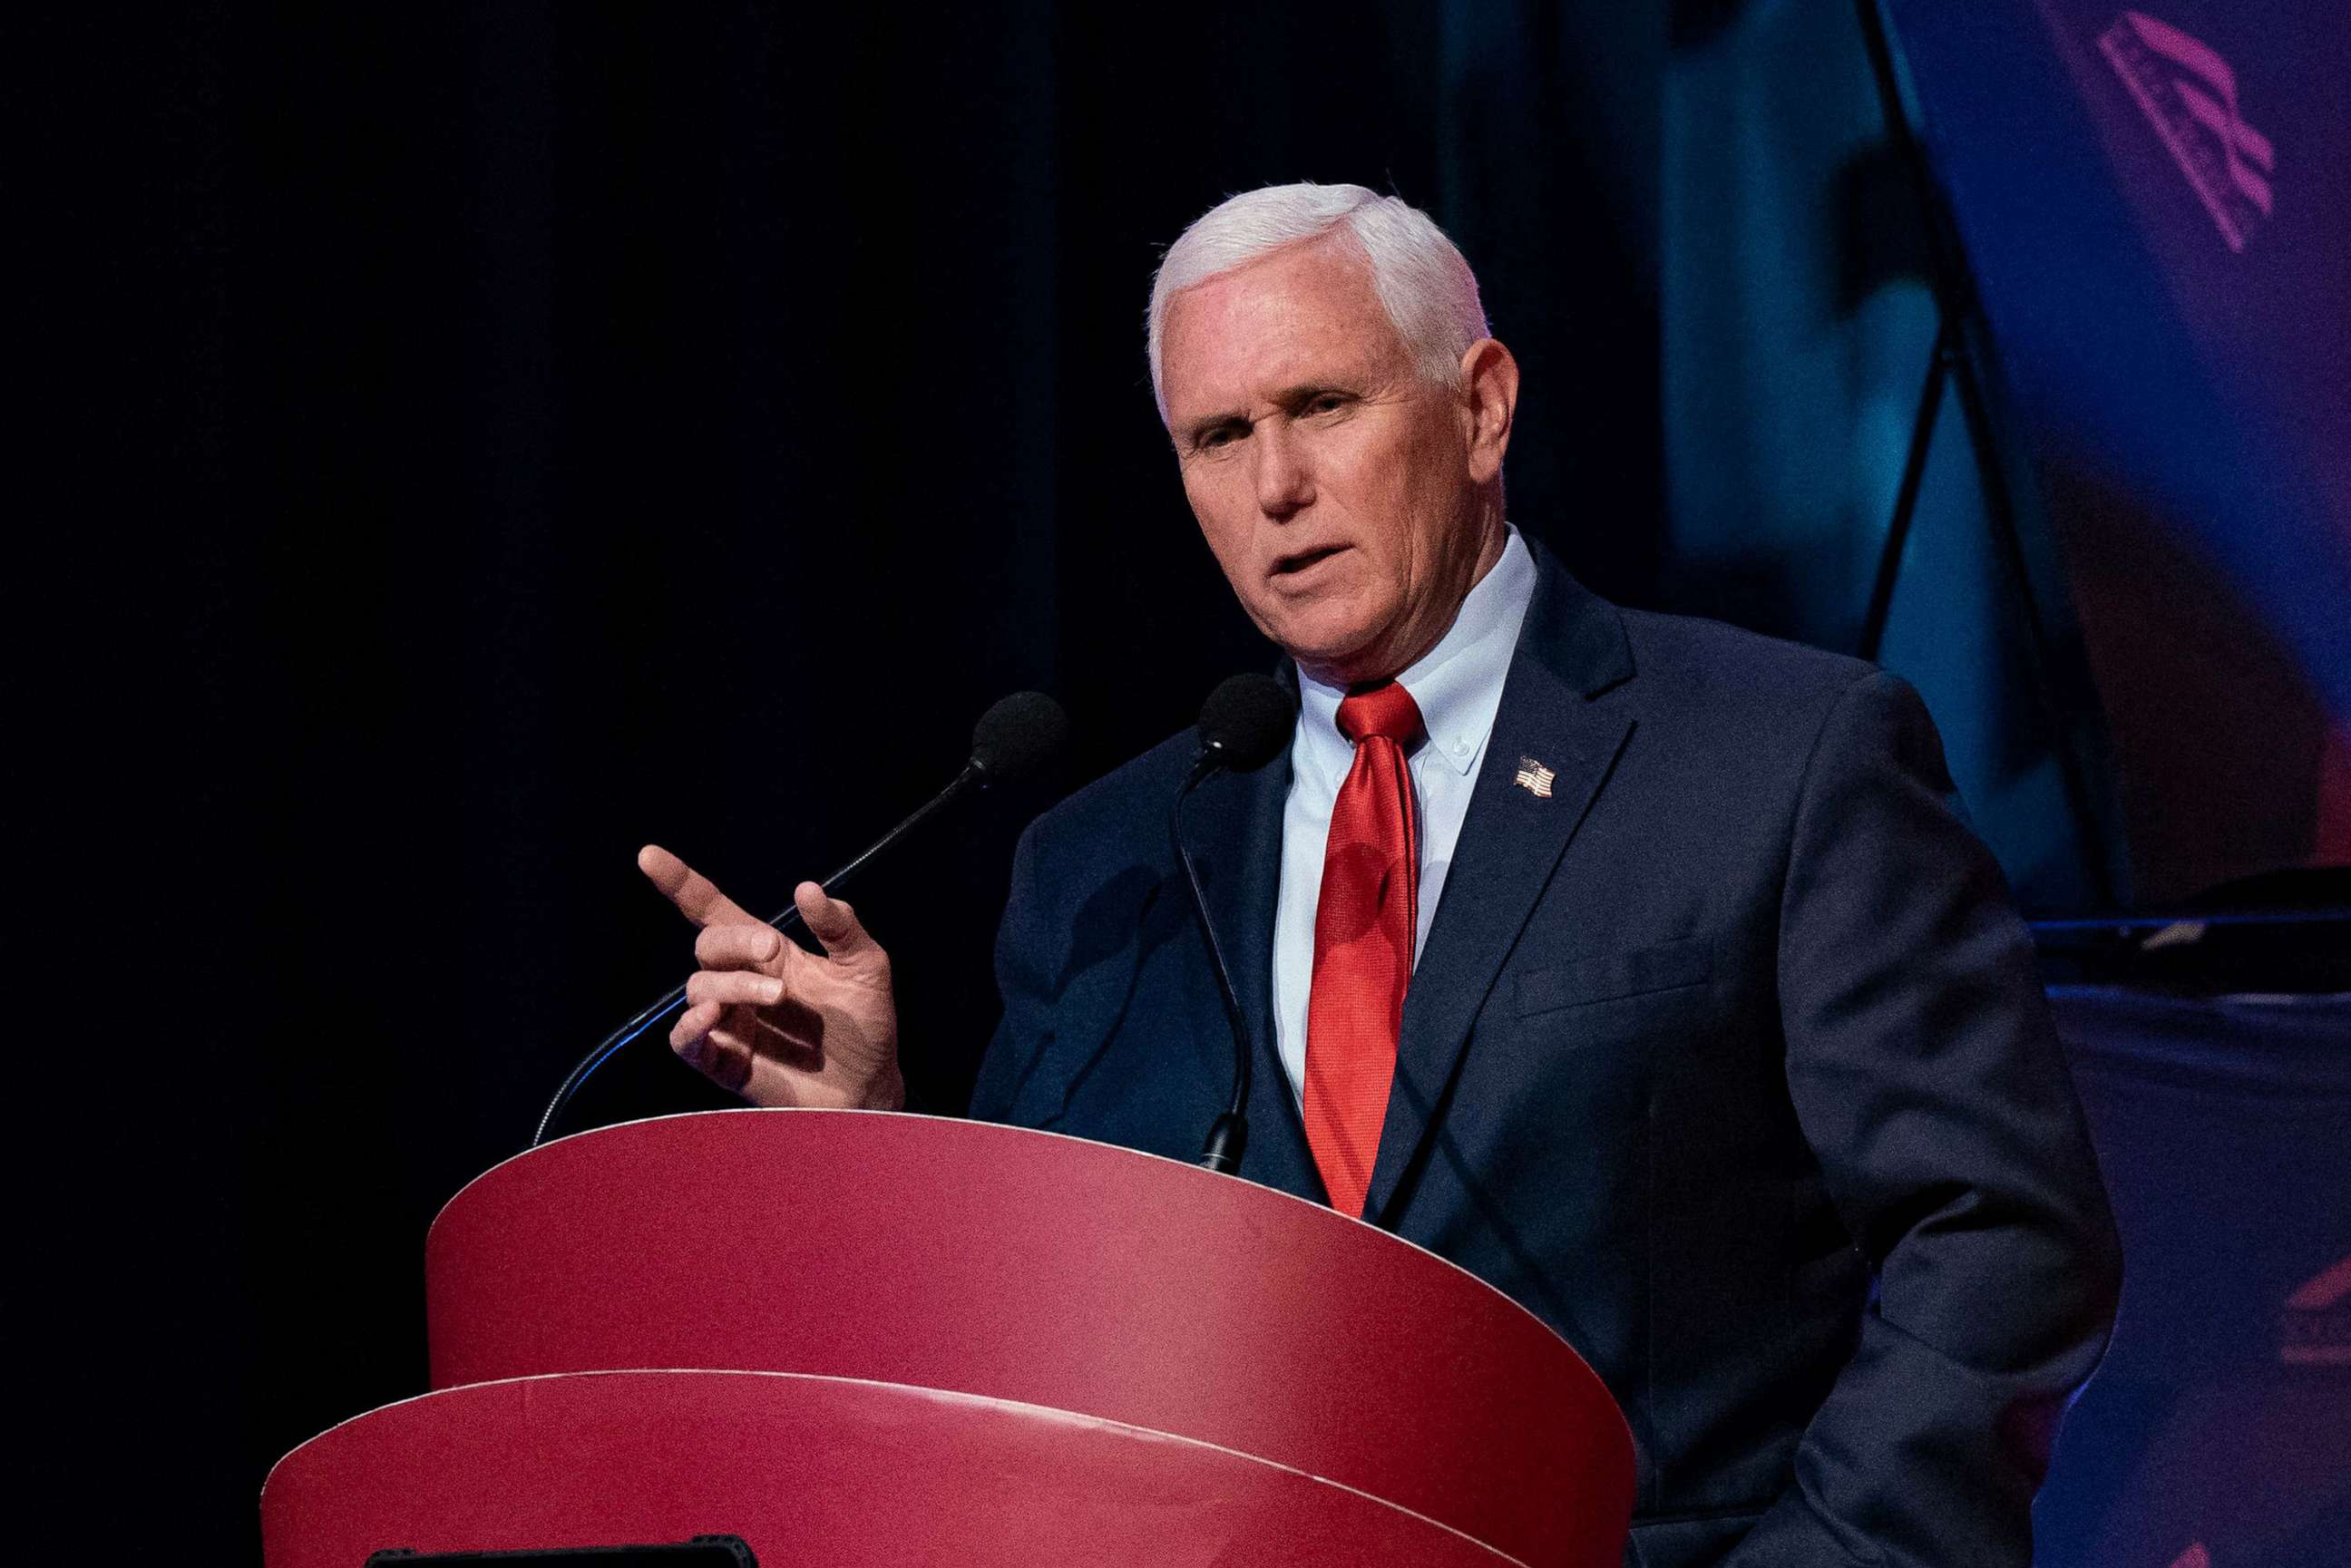 PHOTO: Former Vice President Mike Pence speaks about "Saving America from the Woke Left," at the University of North Carolina Chapel Hill in Chapel Hill, N.C., on April 26, 2023.